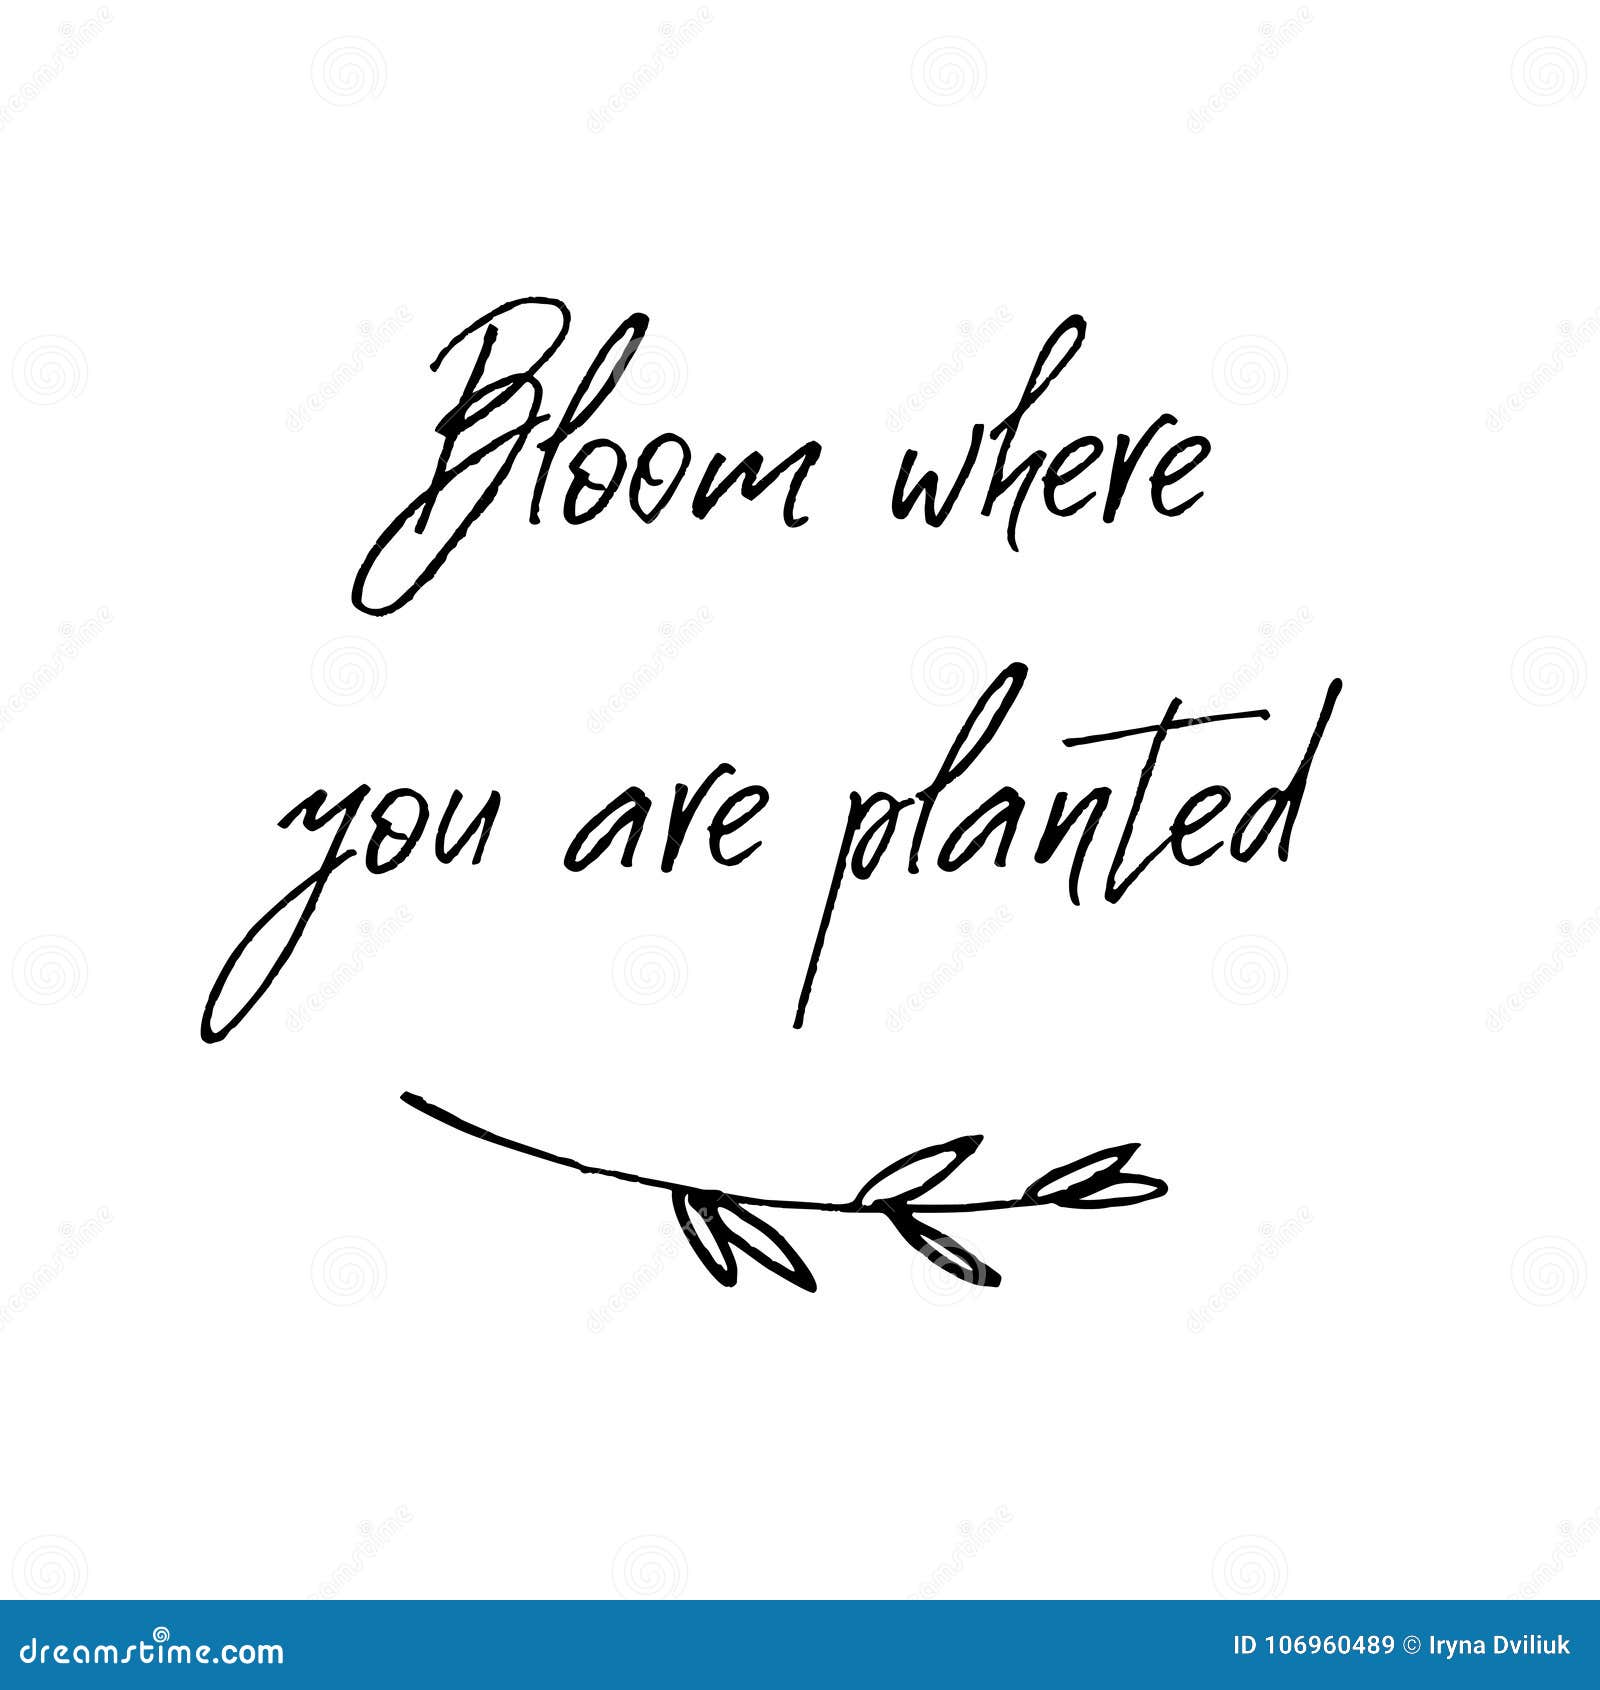 bloom where you are planted. inspirational and motivational handwritten lettering quote.